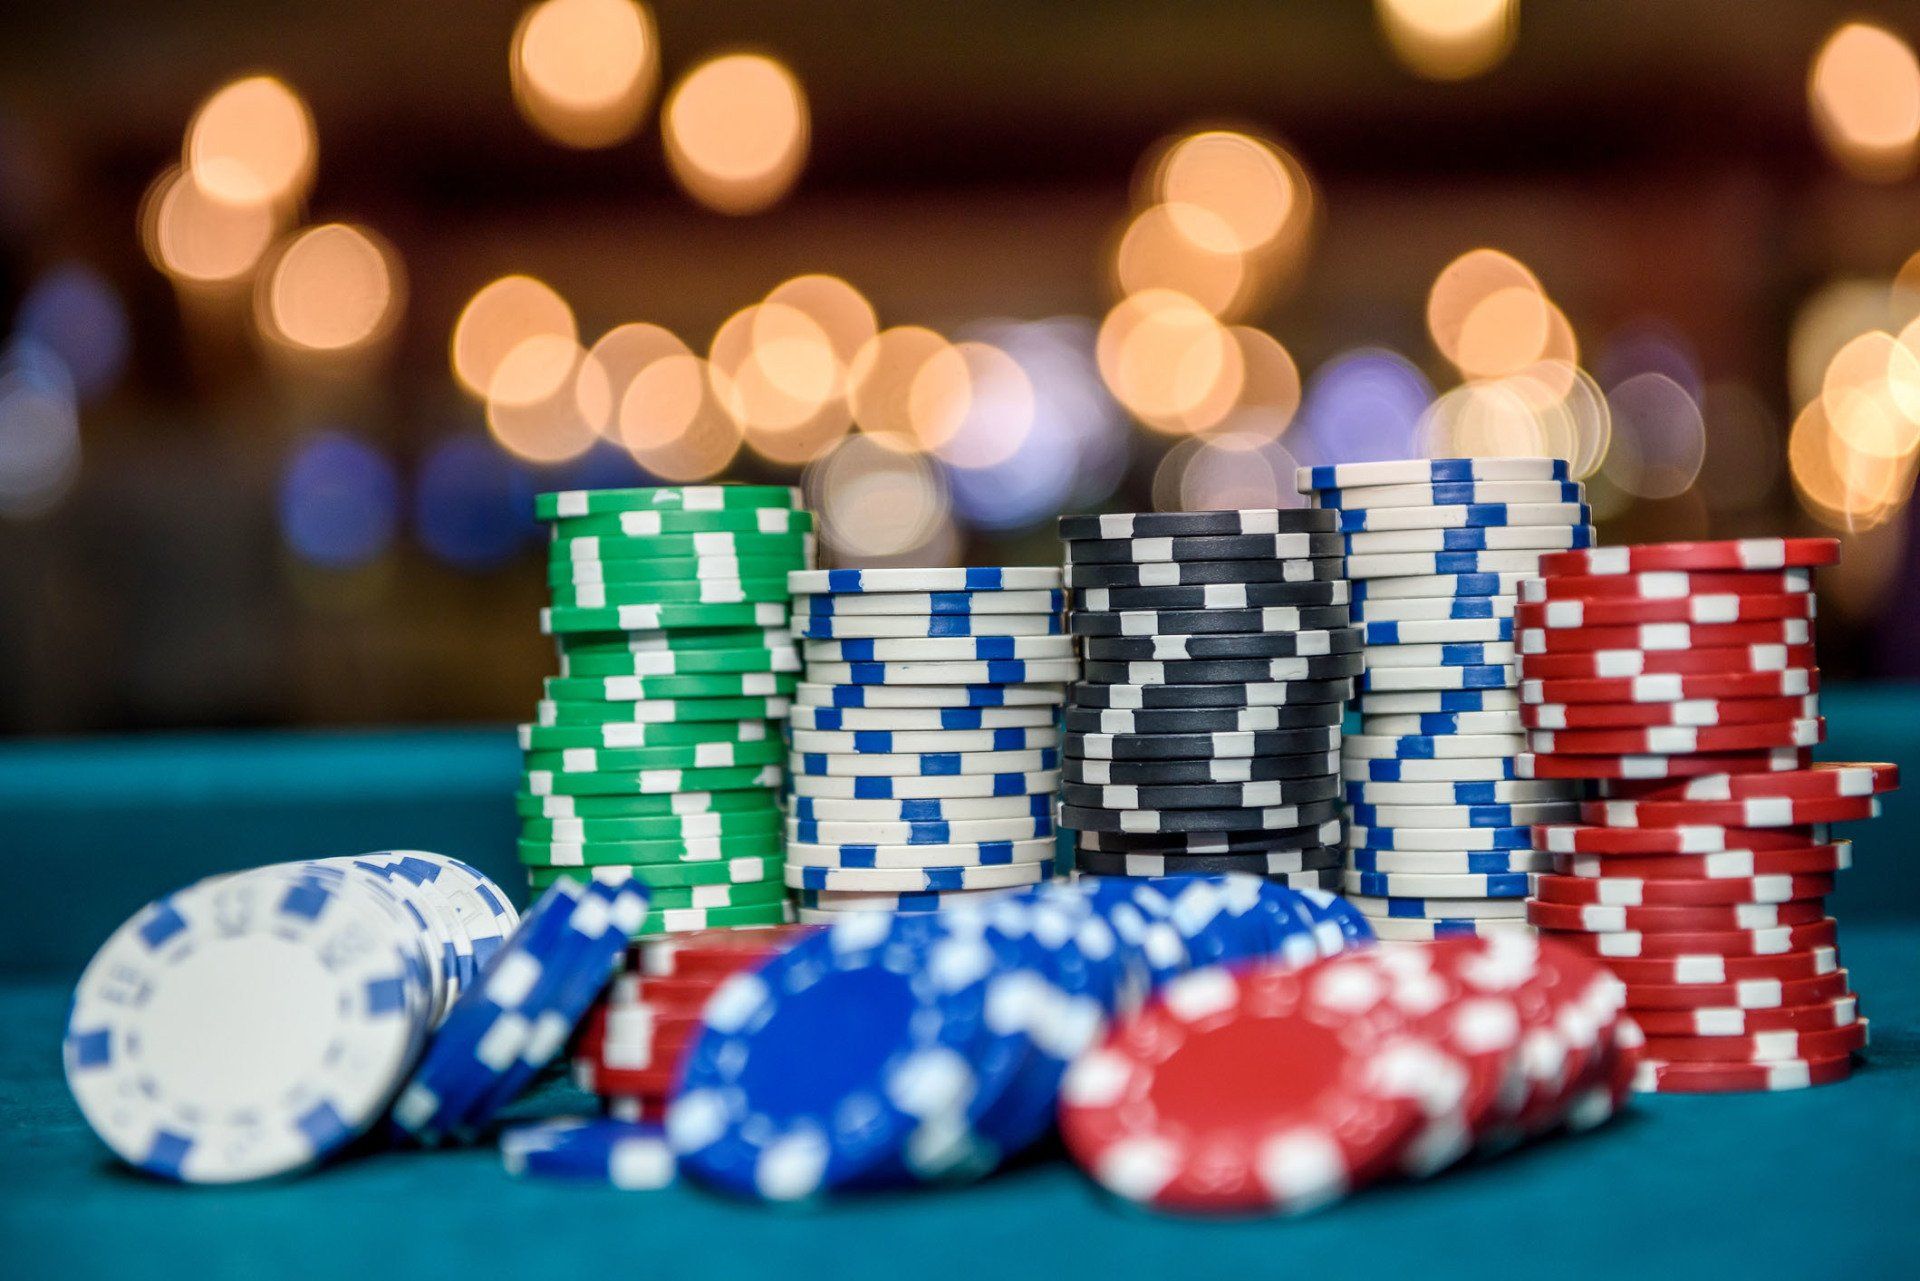 Dazzling atmosphere please note A Guide to Using Coins for Poker Games